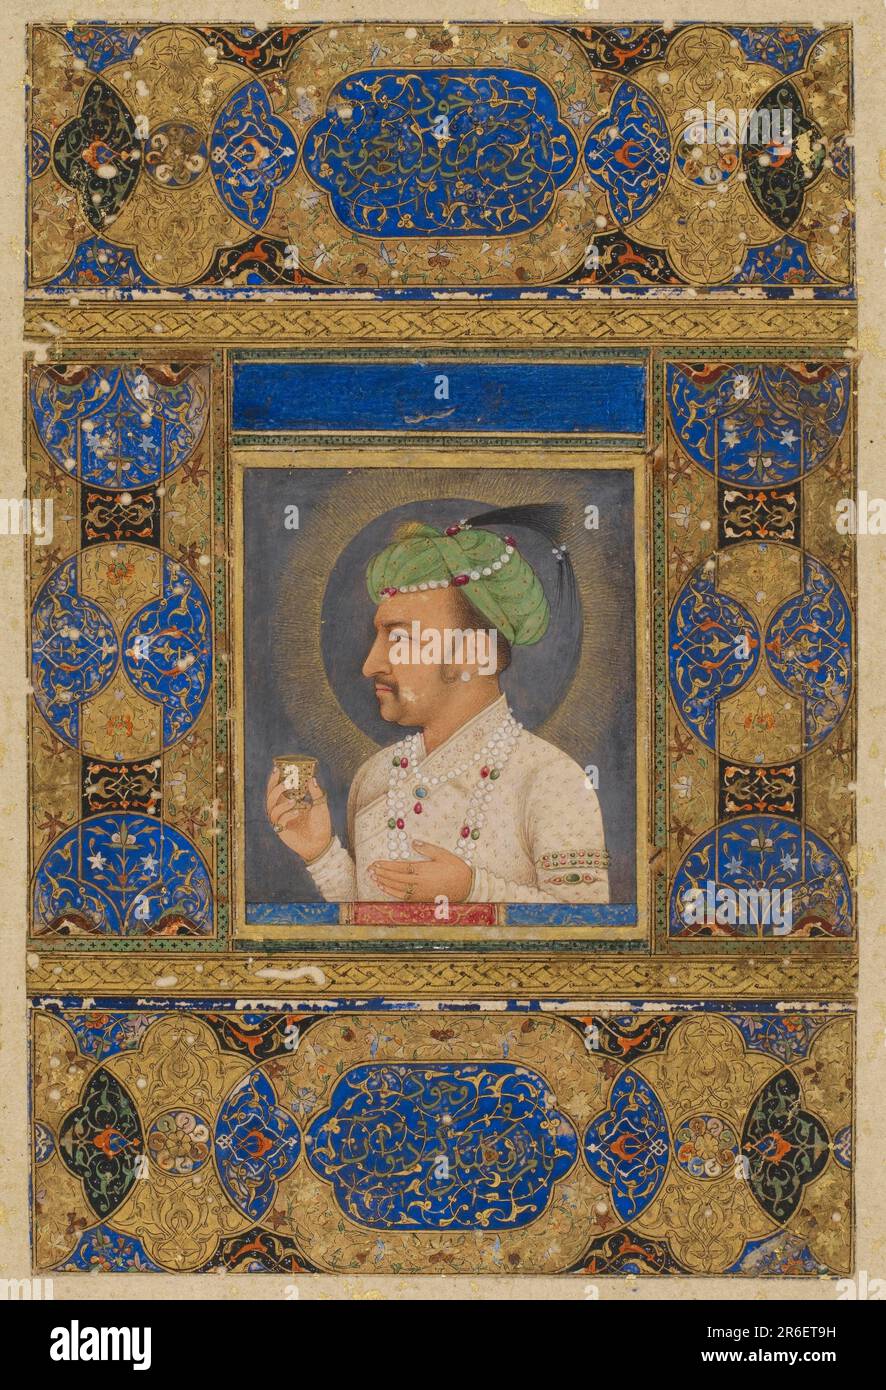 Jahangir. Date: 17th century. Origin: India. Period: Mughal dynasty. Color and gold on paper. Museum: Freer Gallery of Art and Arthur M. Sackler Gallery. Stock Photo